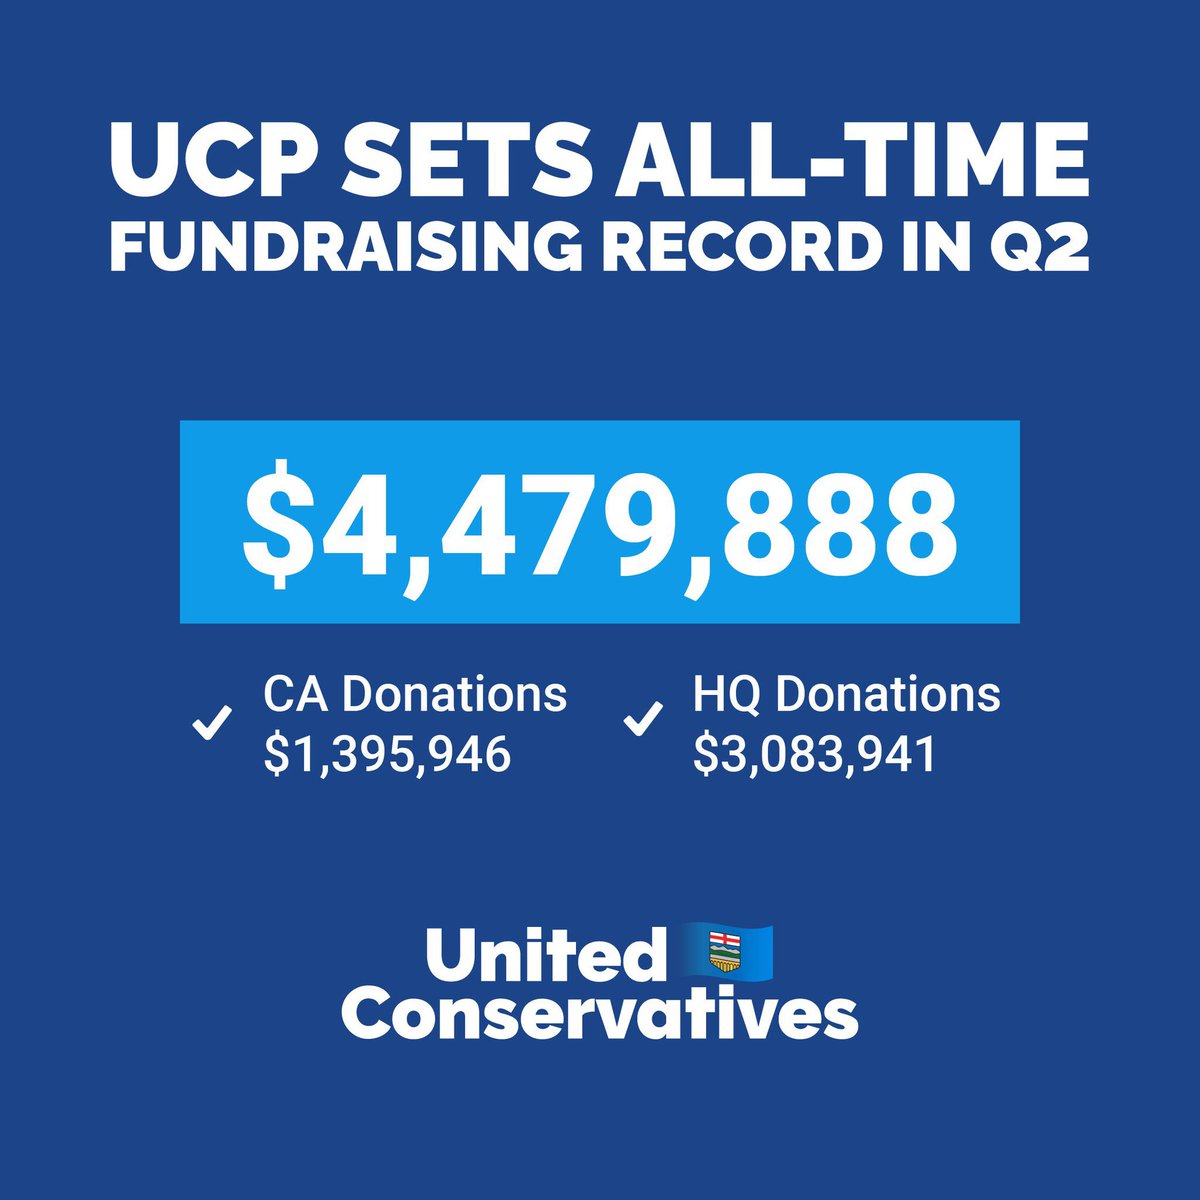 Wow. I want to thank wealthy business owners, oil & gas execs, and rural conservative manipulated by David Parker for helping set a new fundraising record!

You are the reason we were able to push so much lies & misinformation to win the last election!

#abpoli #cdnpoli #teamUCP